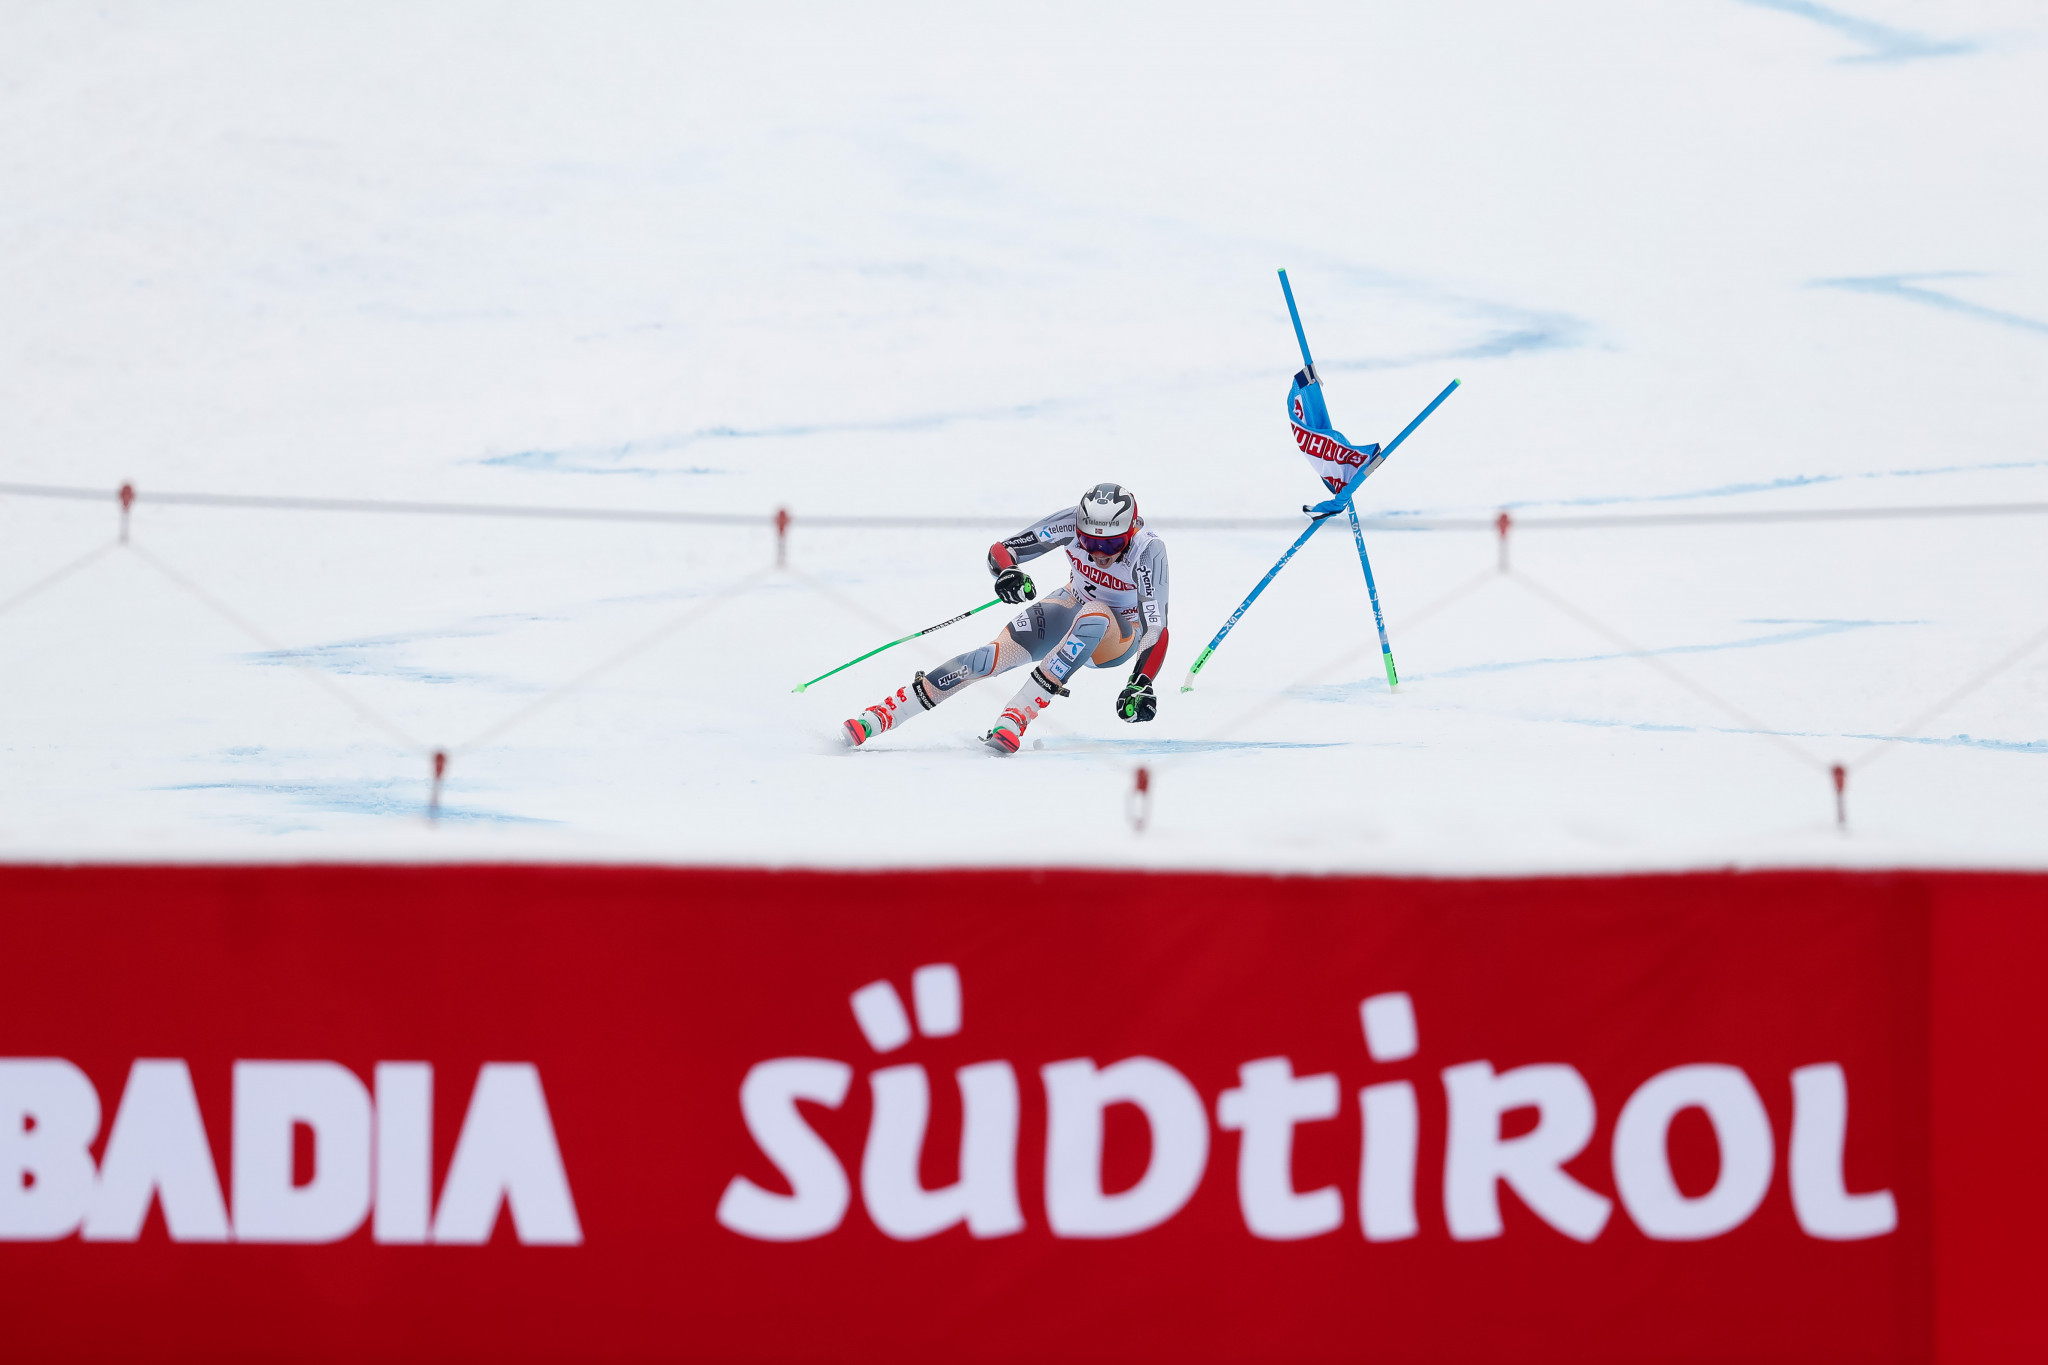 Kristoffersen claims first giant slalom victory of season at FIS Alpine Skiing World Cup